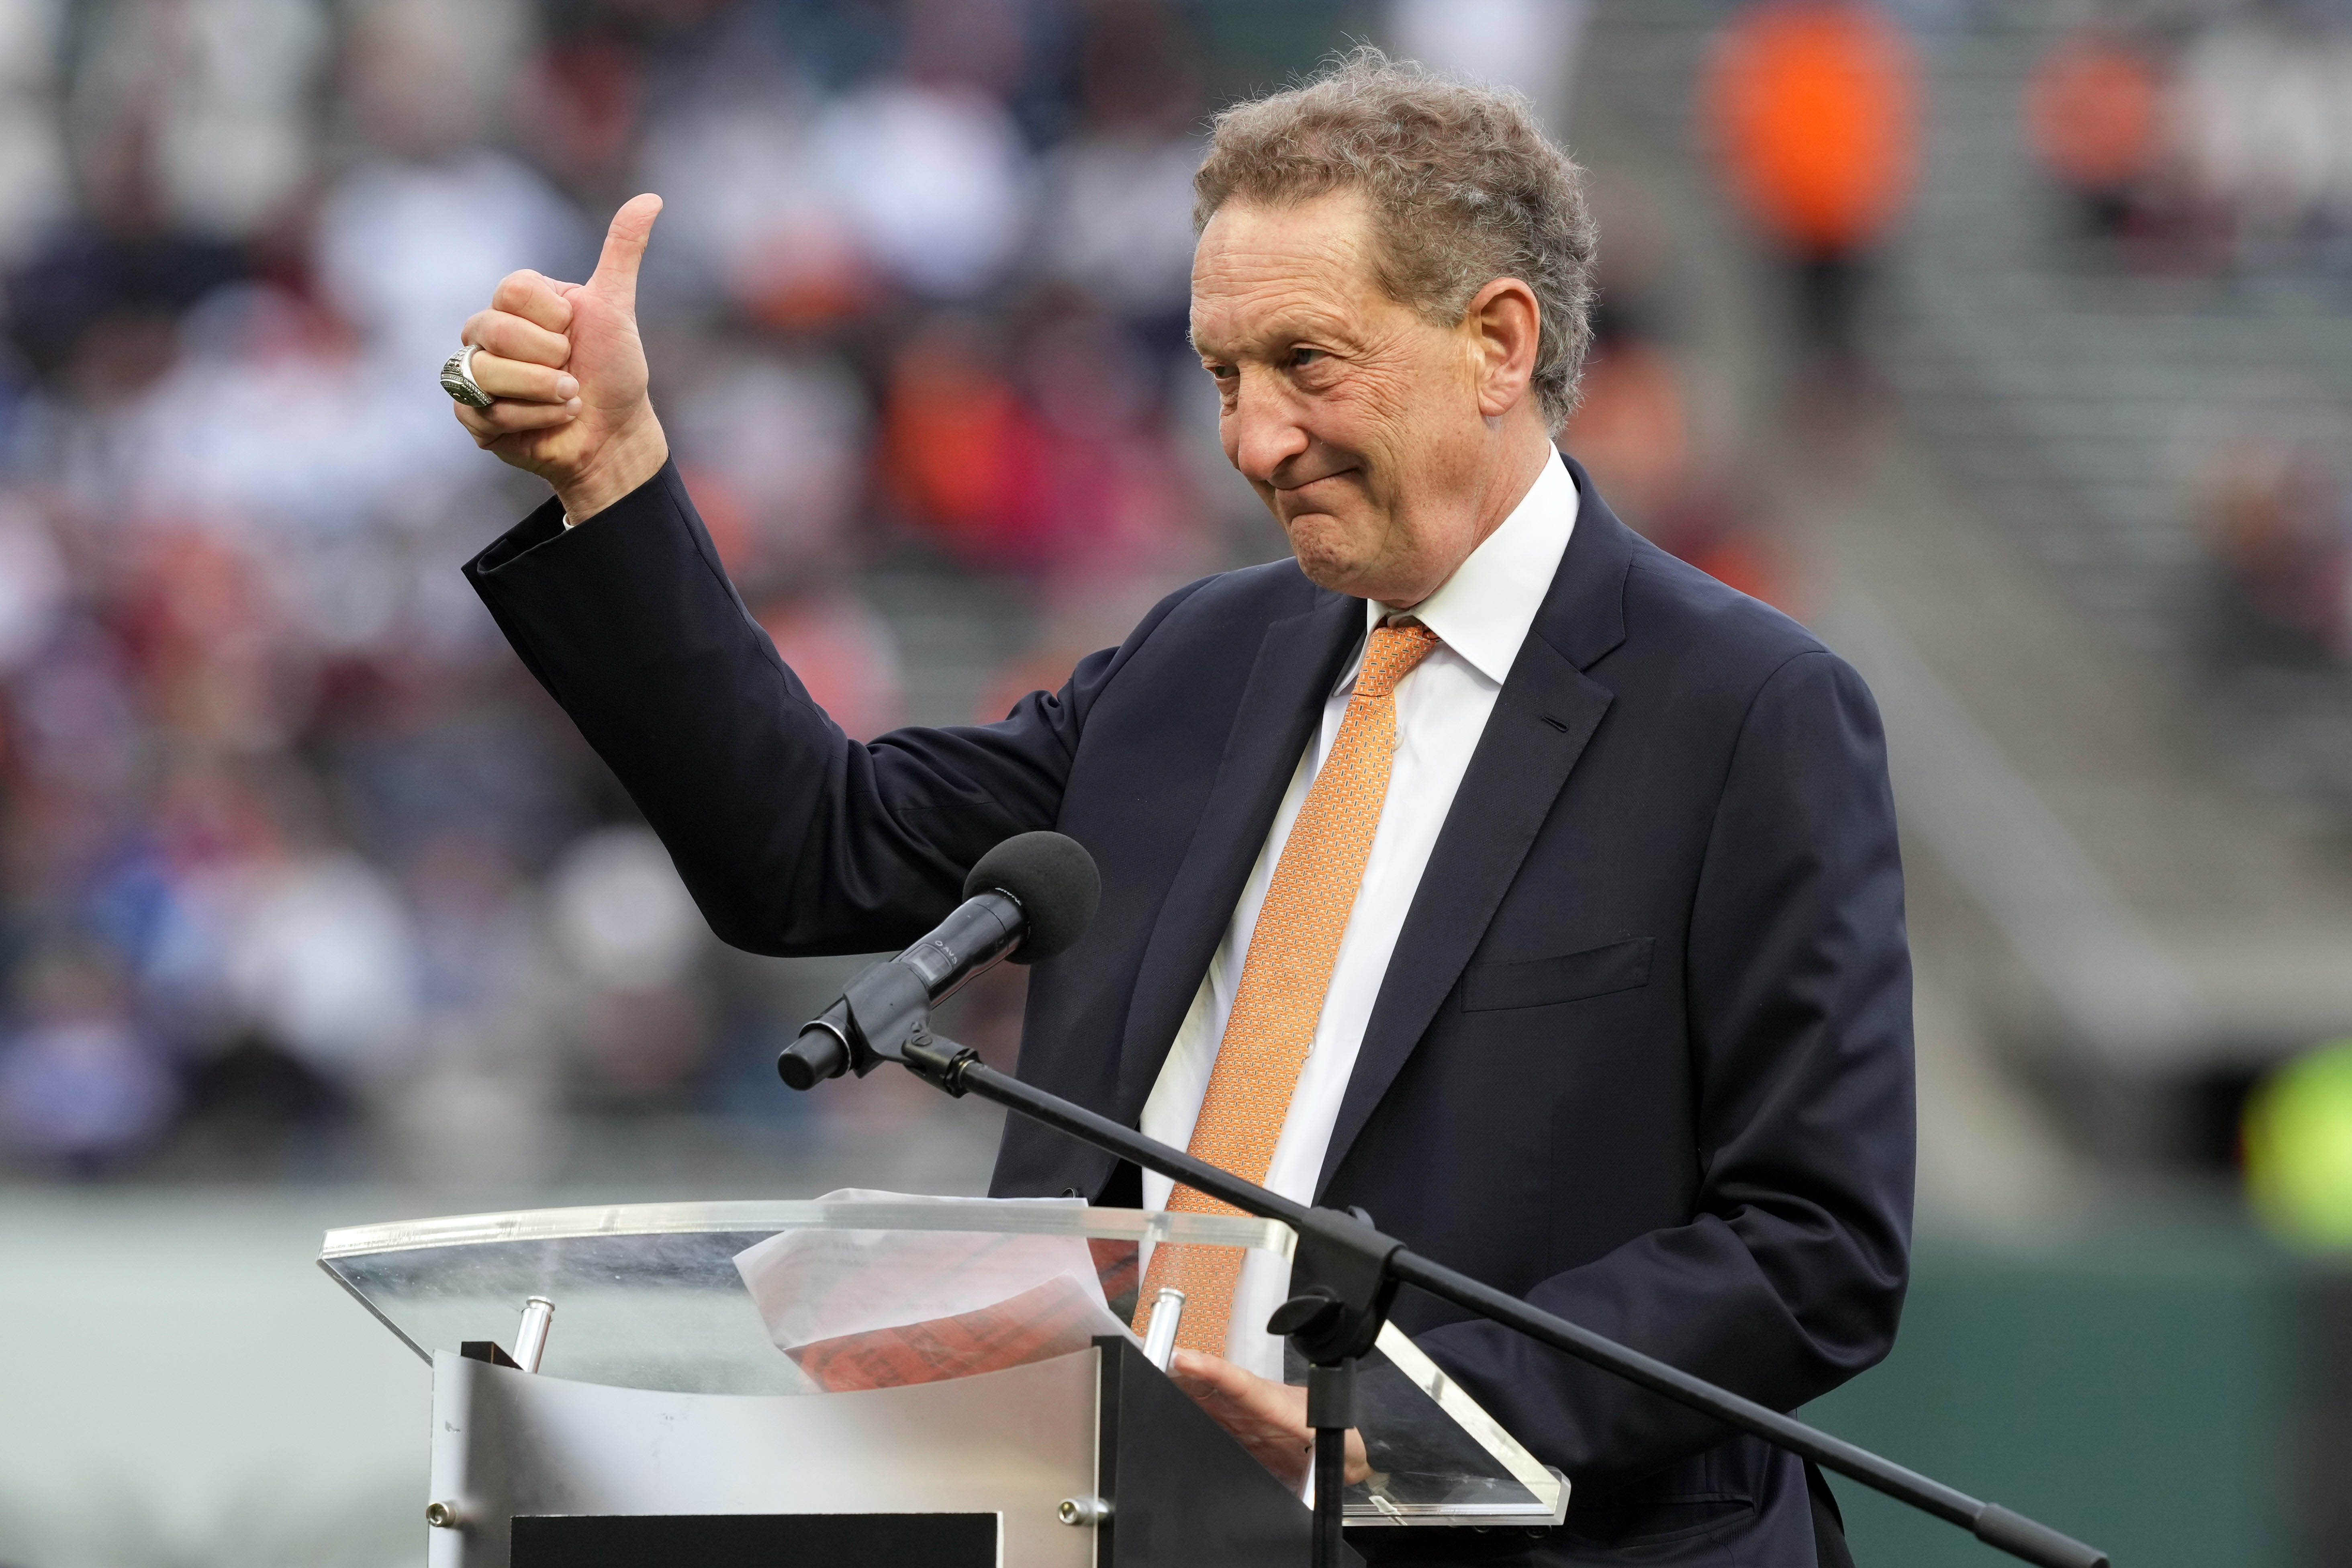 SF Giants CEO pledges team will return to title contention in 2023